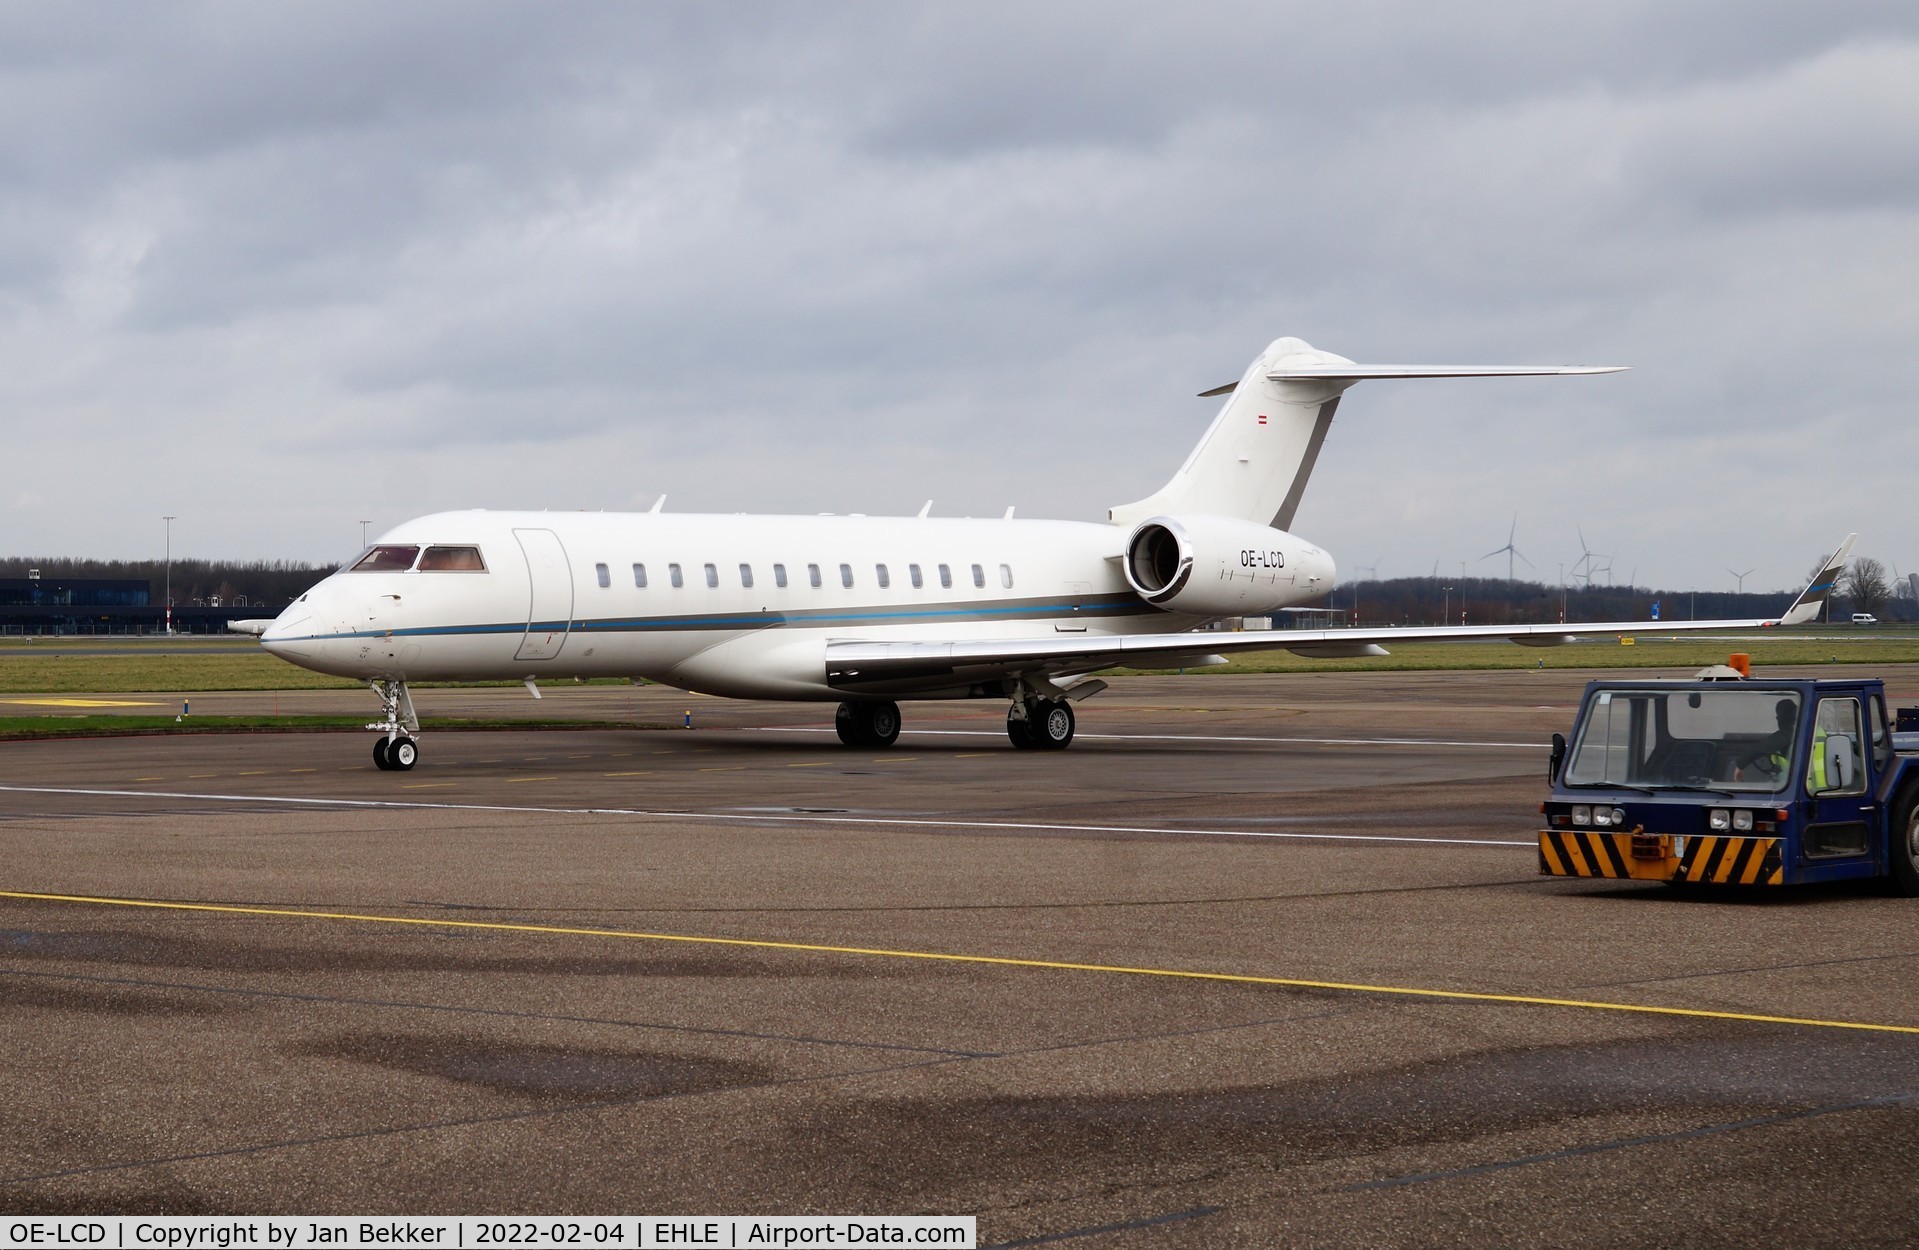 OE-LCD, 2008 Bombardier BD-700-1A10 Global Express XRS C/N 9250, Lelystad Airport. Customer for Satys Aircraft Paint Company to get a new livery